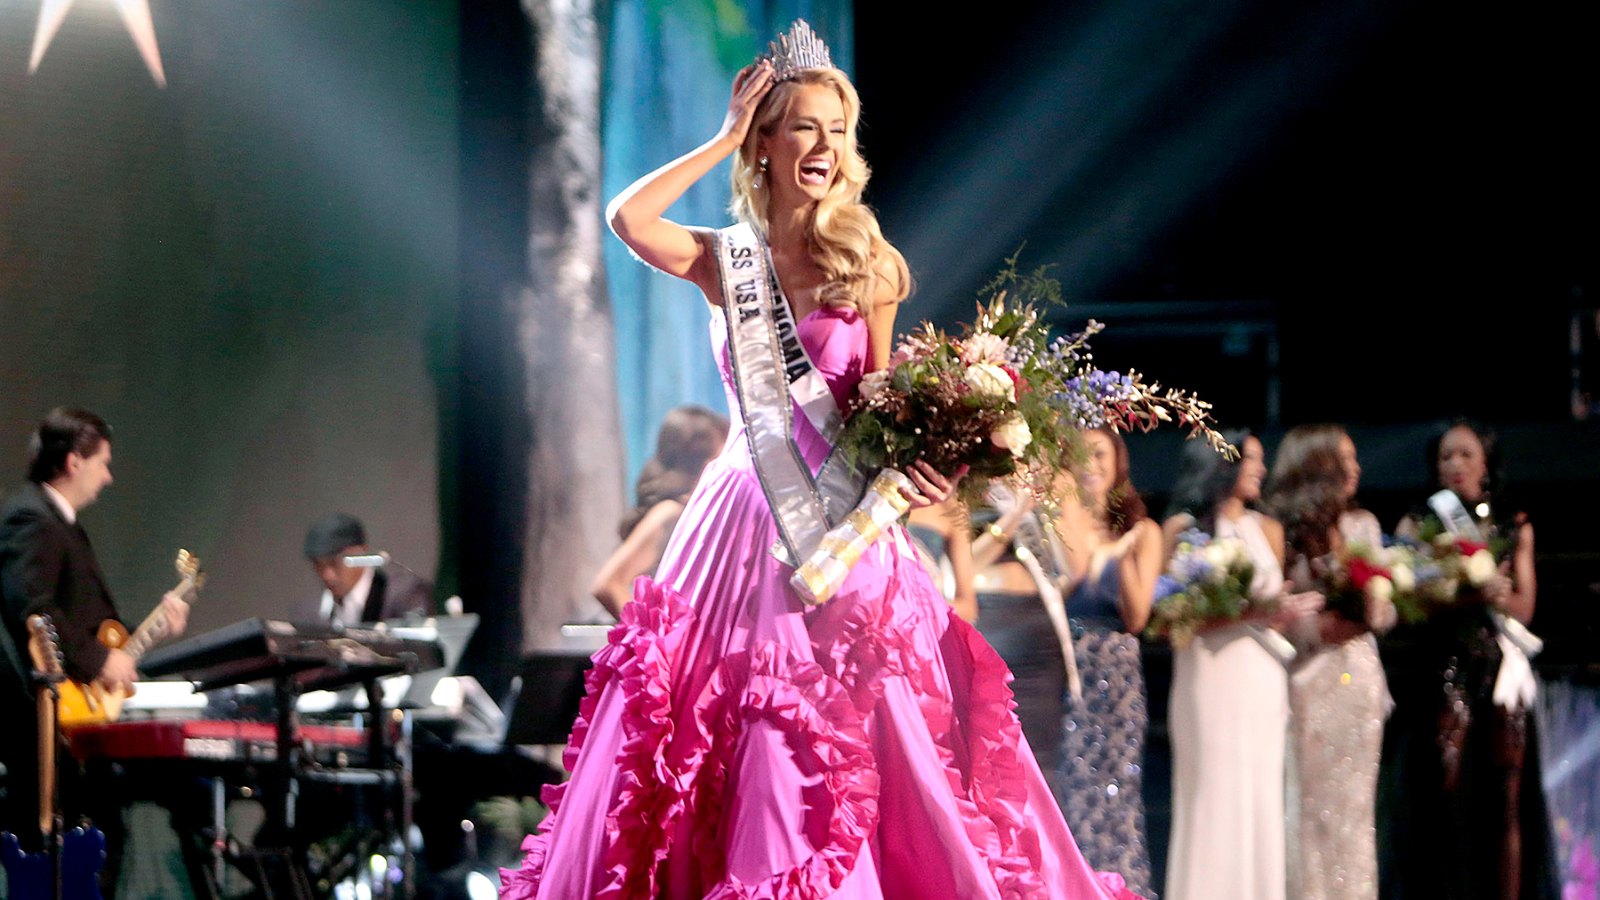 Miss USA Olivia Jordan of Oklahoma is crowned on stage at the 2015 Miss USA Pageant.